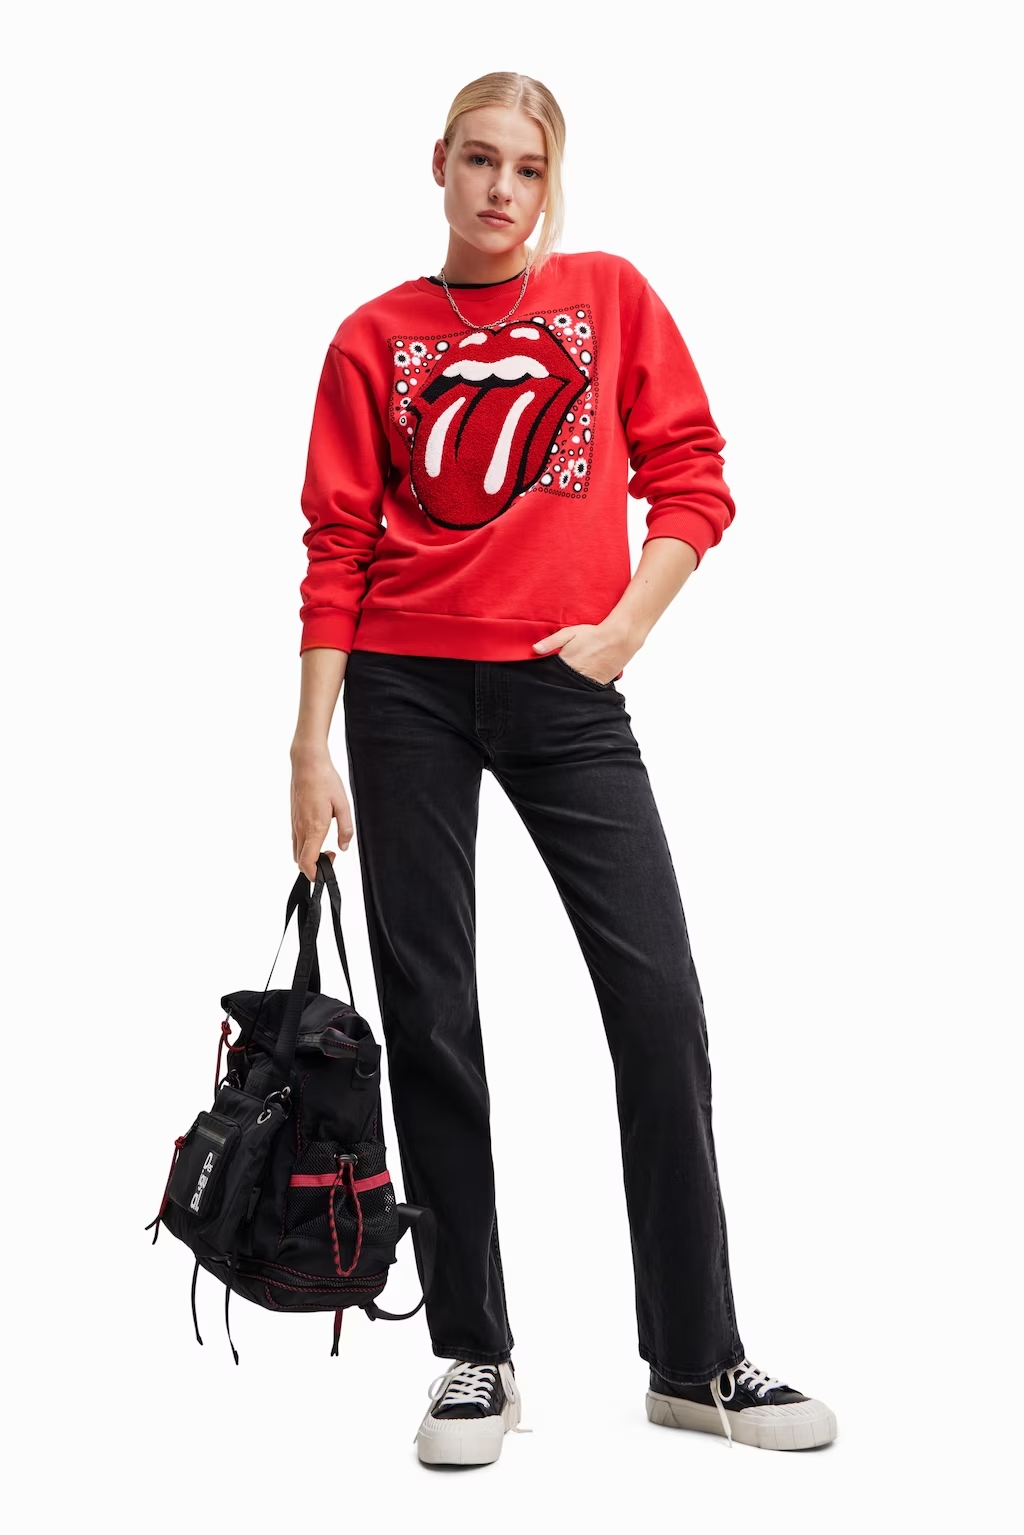 Rolling Stones red cotton sweatshirt by Desigual Fall 2023 collection